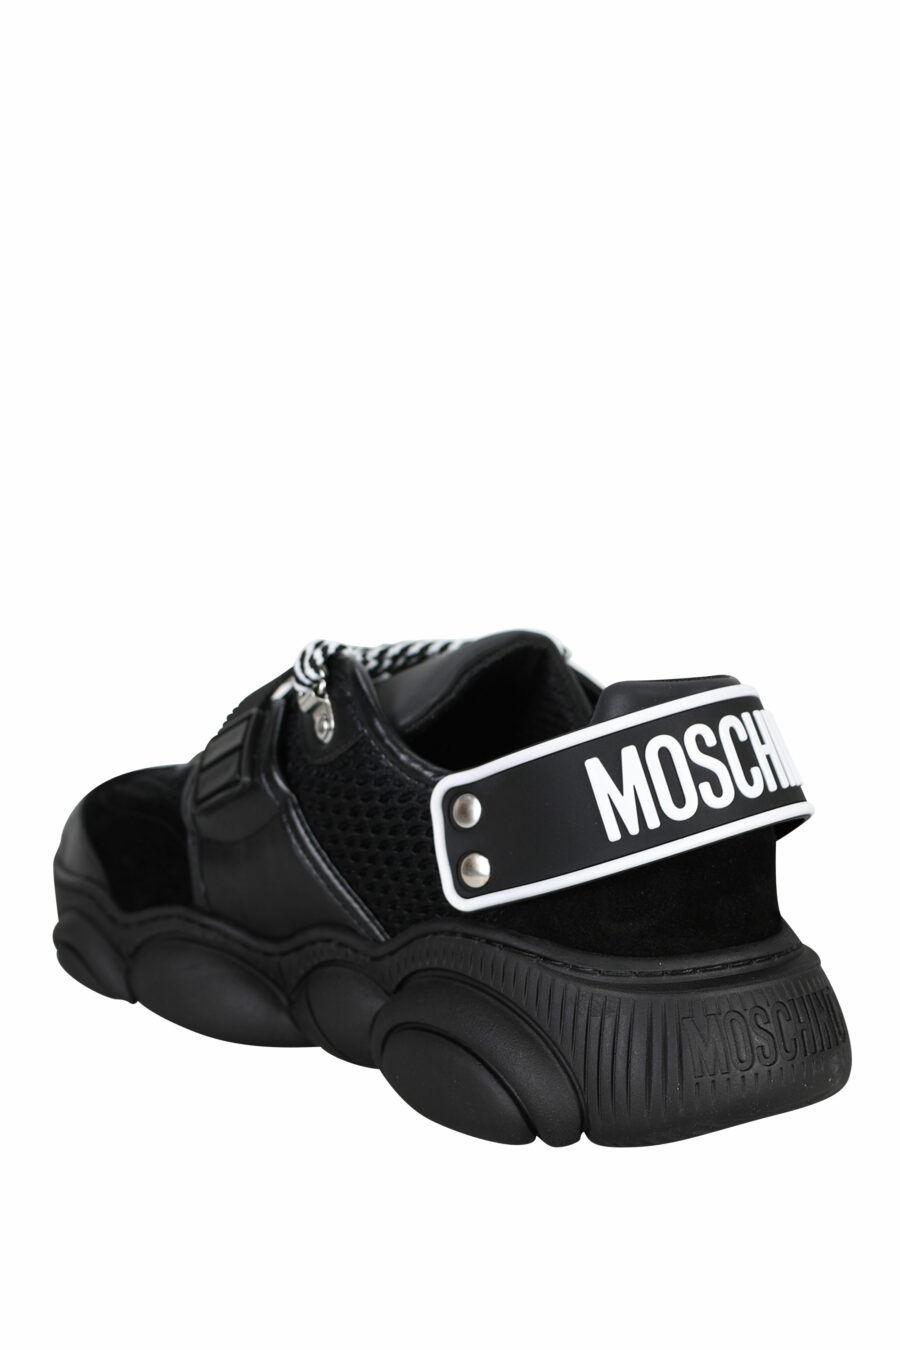 Black trainers with laces and velcro and rubber logo - 8054653226388 3